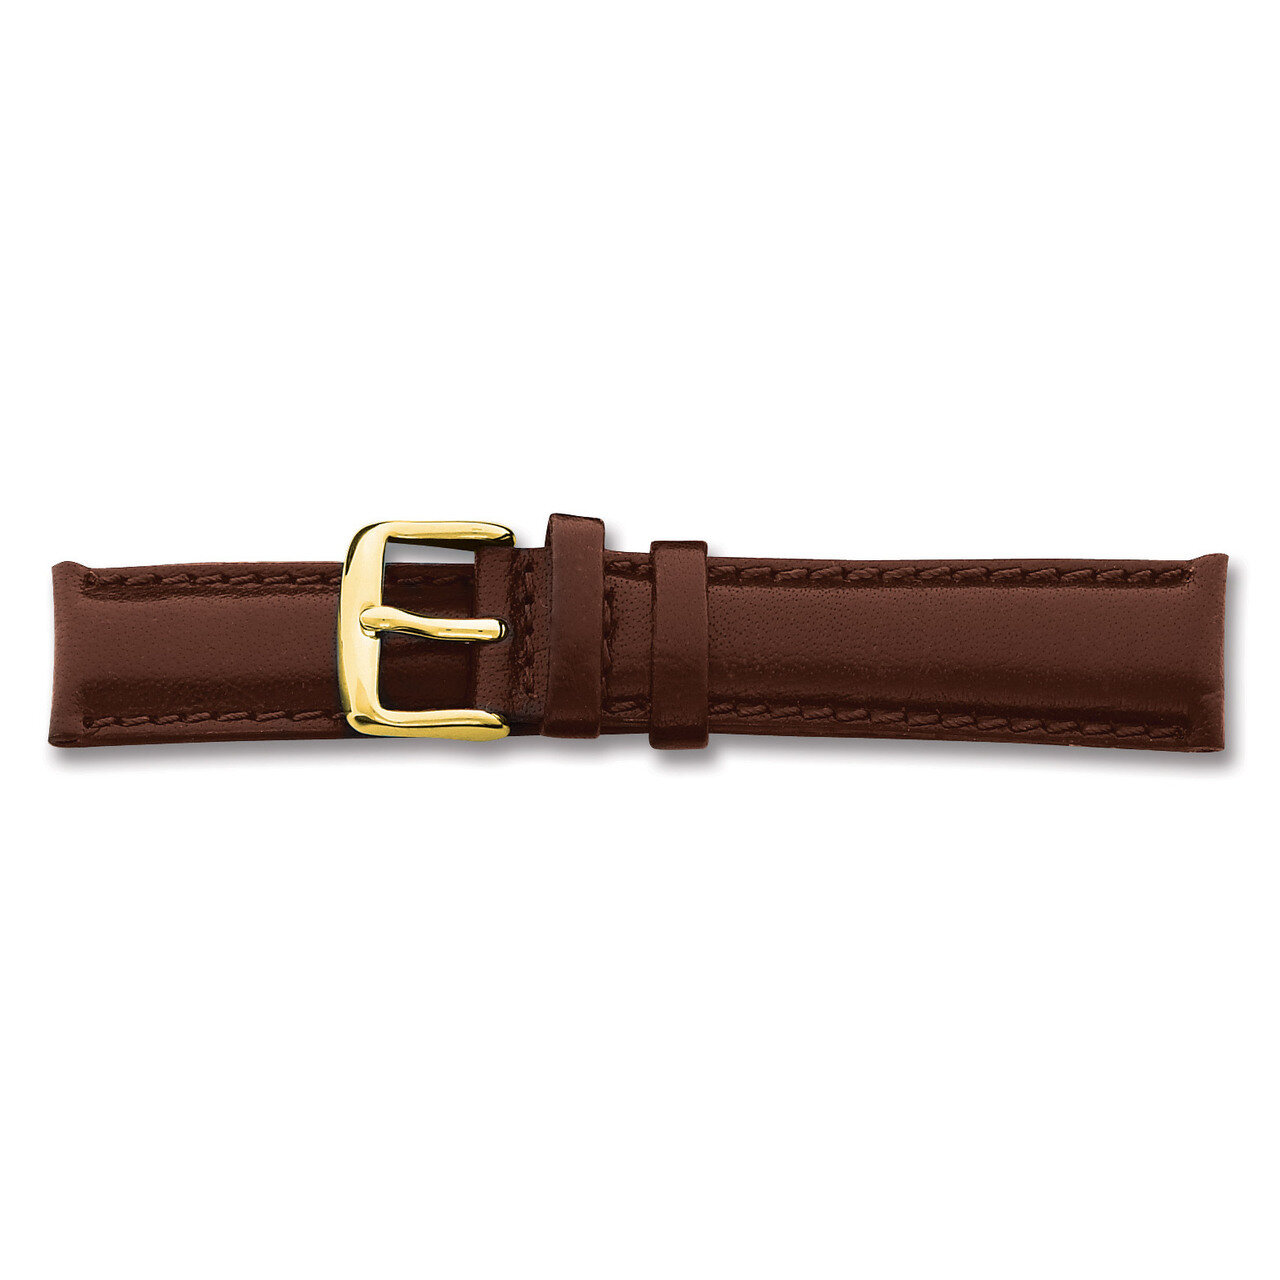 24mm Short Brown Smooth Leather Chrono Bkl Watch Band 6.75 Inch Gold-tone BAY140S-24